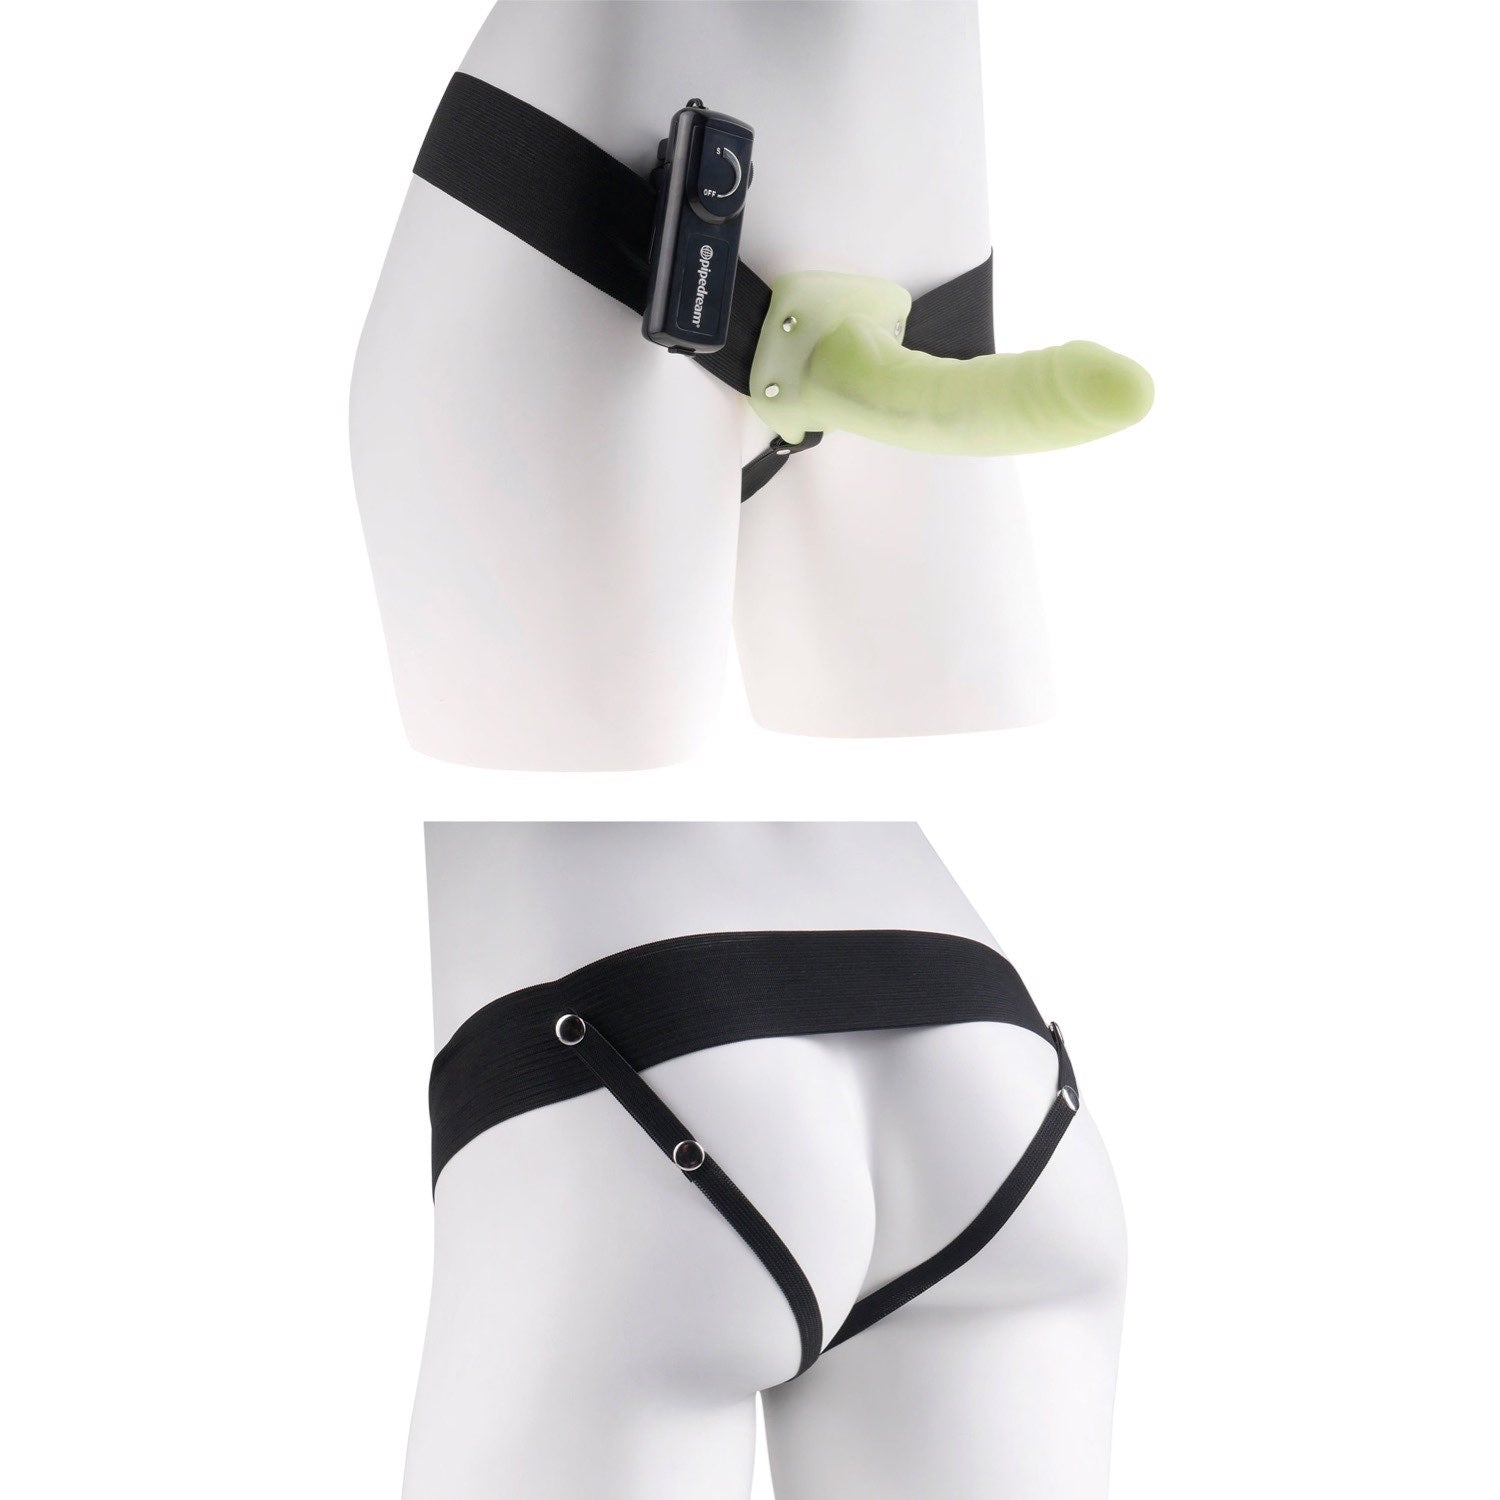 Fetish Fantasy Series Vibrating Hollow Strap-on - Glow in Dark 6&quot; Vibrating Strap-On for Her &amp; Him by Pipedream